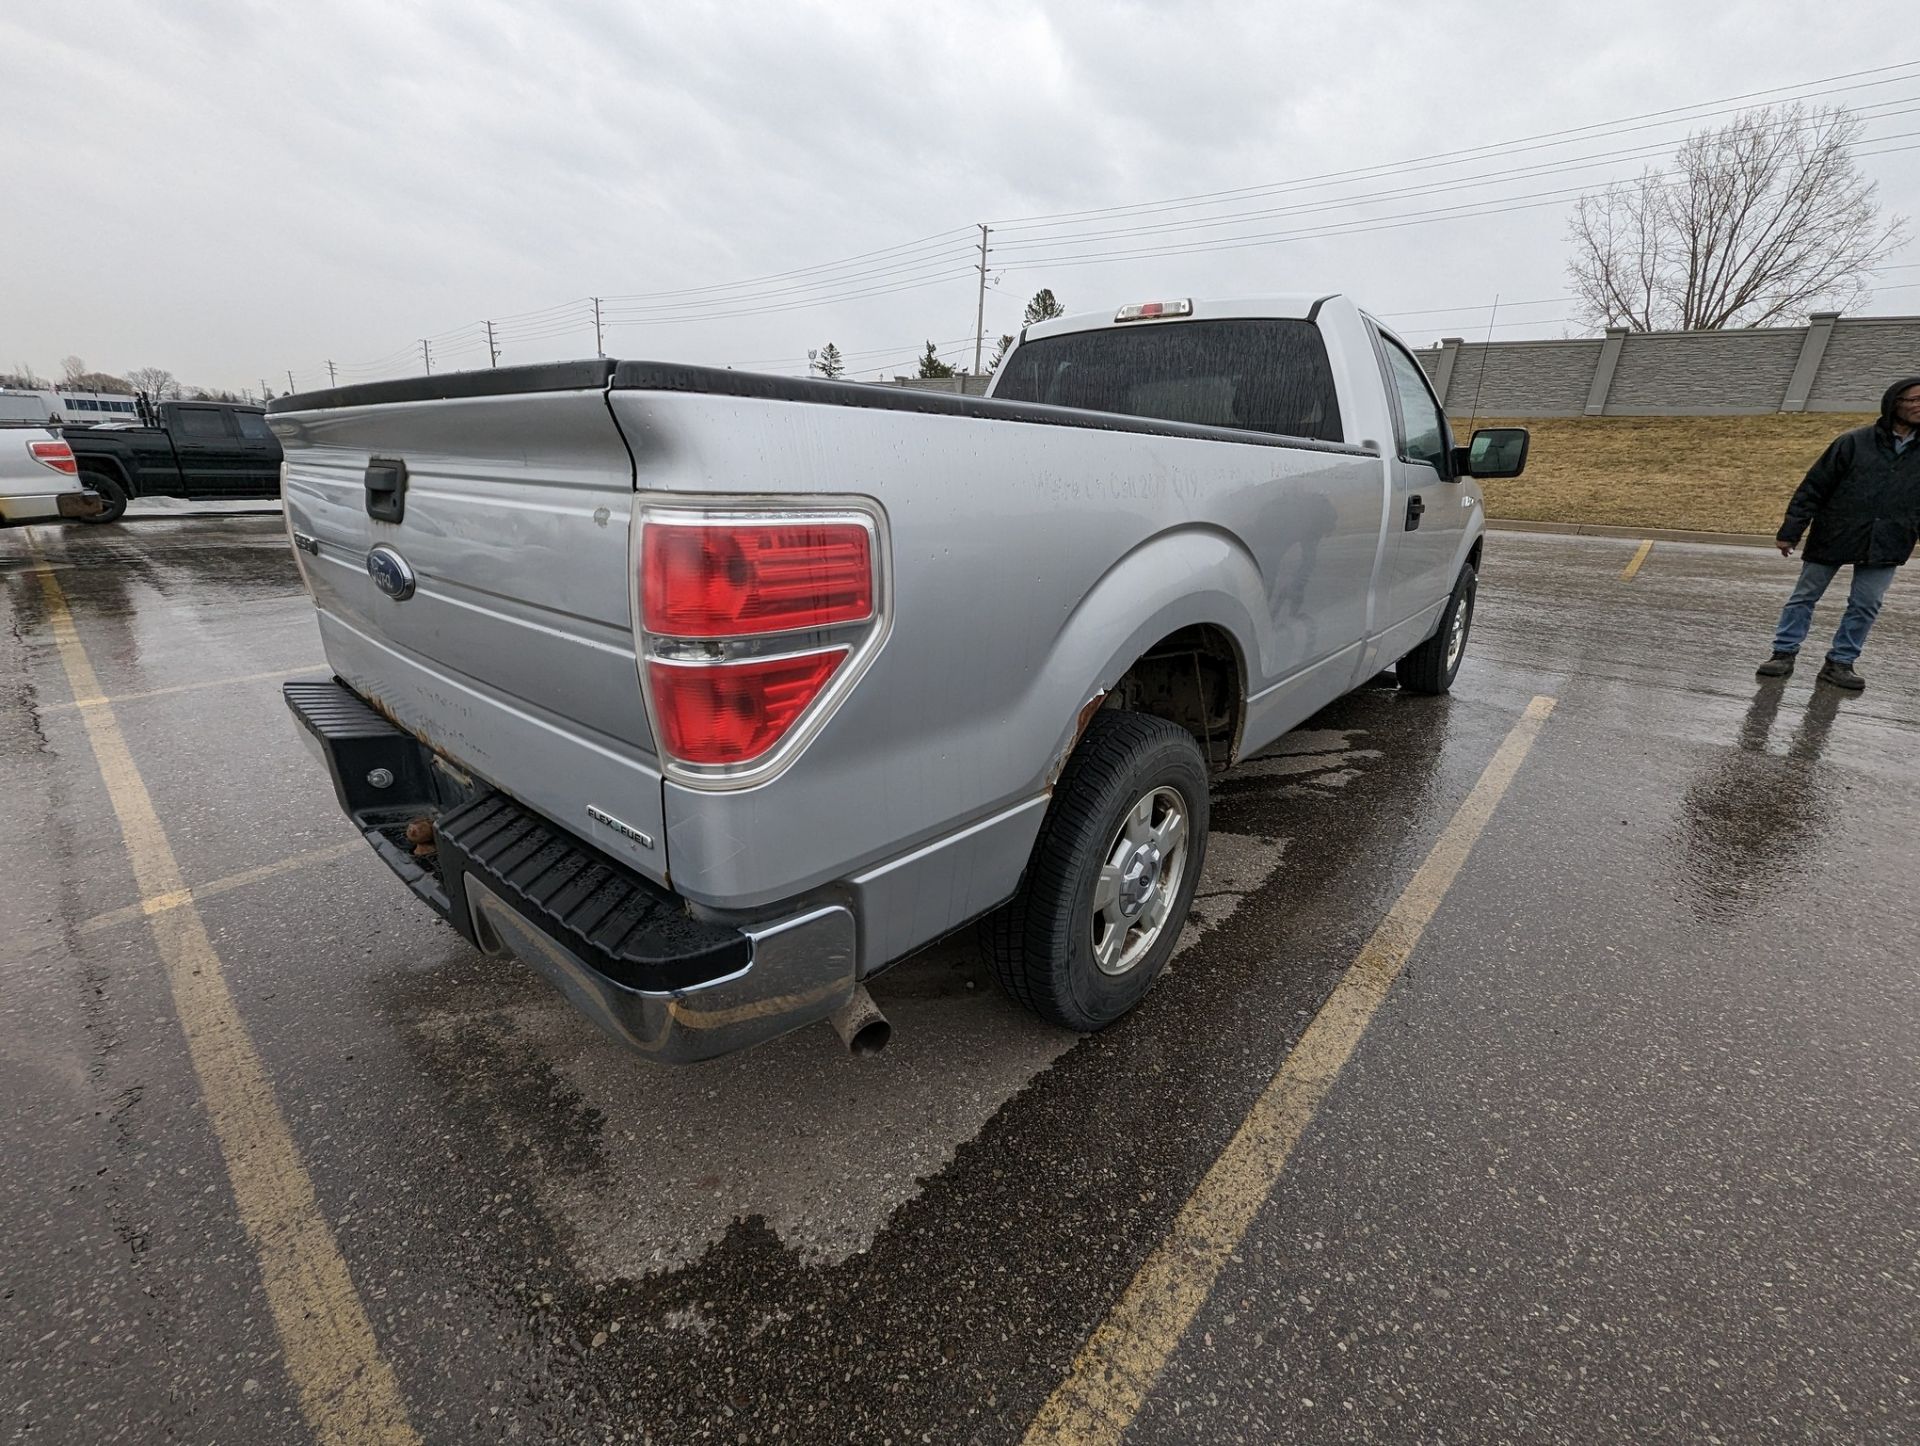 2013 FORD F150 XLT PICKUP TRUCK, VIN# 1FTNF1CFXDKF50570, APPROX. 423,552KMS (NO BLACK TOOL BOXES) - Image 5 of 9